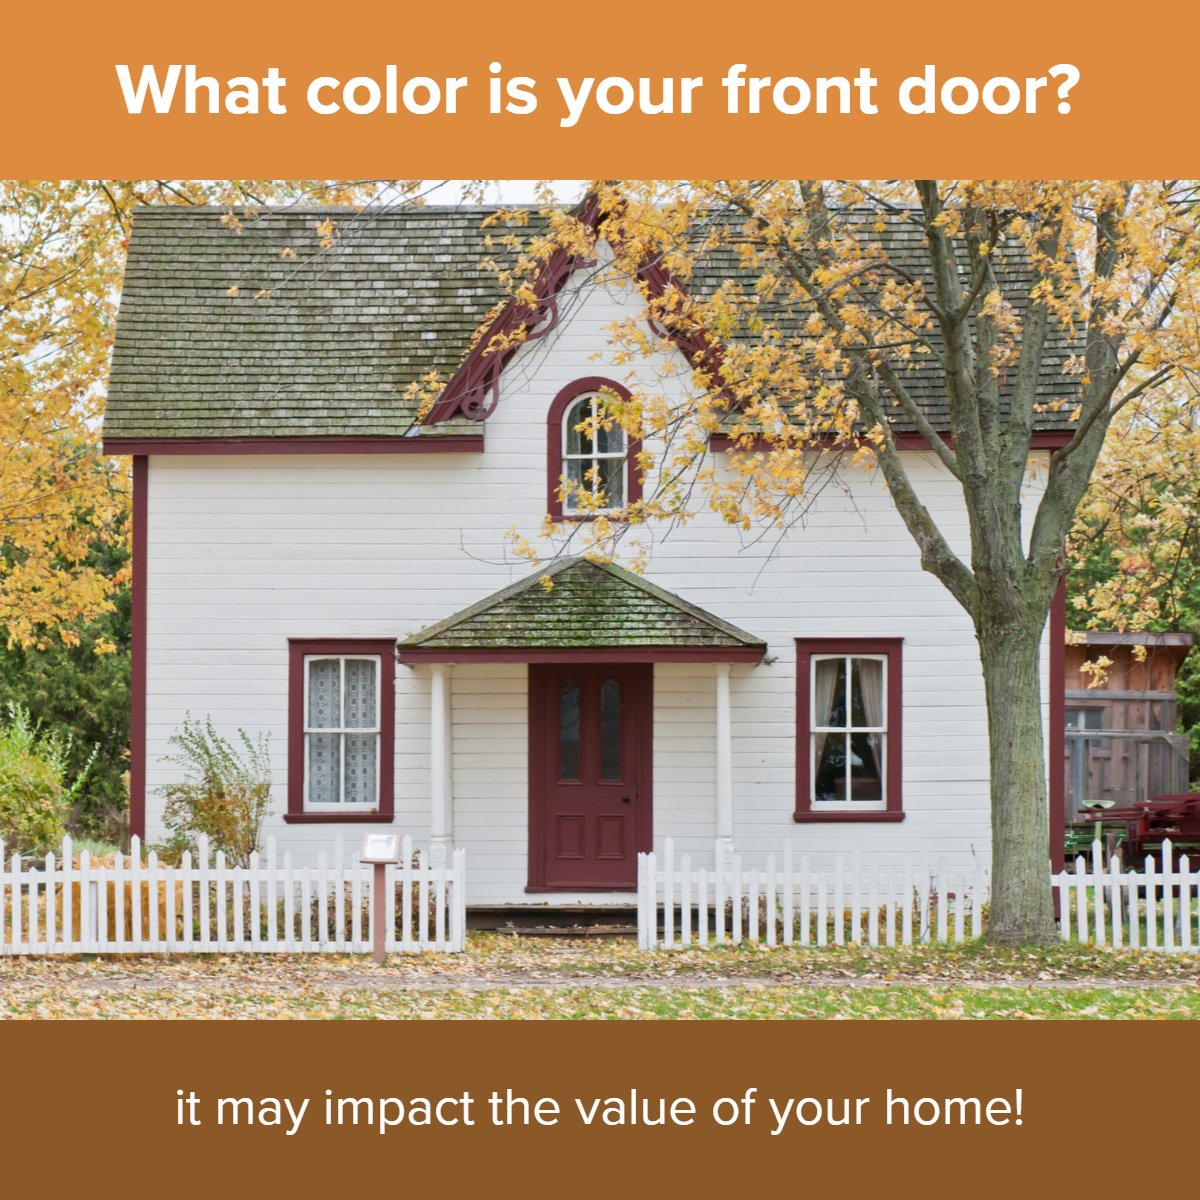 What color is your front door 🚪

Did you know it may impact the value of your home

#questions #frontdoor #doorcolor #exterior #realestate
#realestate #realtor #southcarolina #homebuyer #land #homeowner #homeimprovement #lakemarion #summerville #lakemoultrie #sc